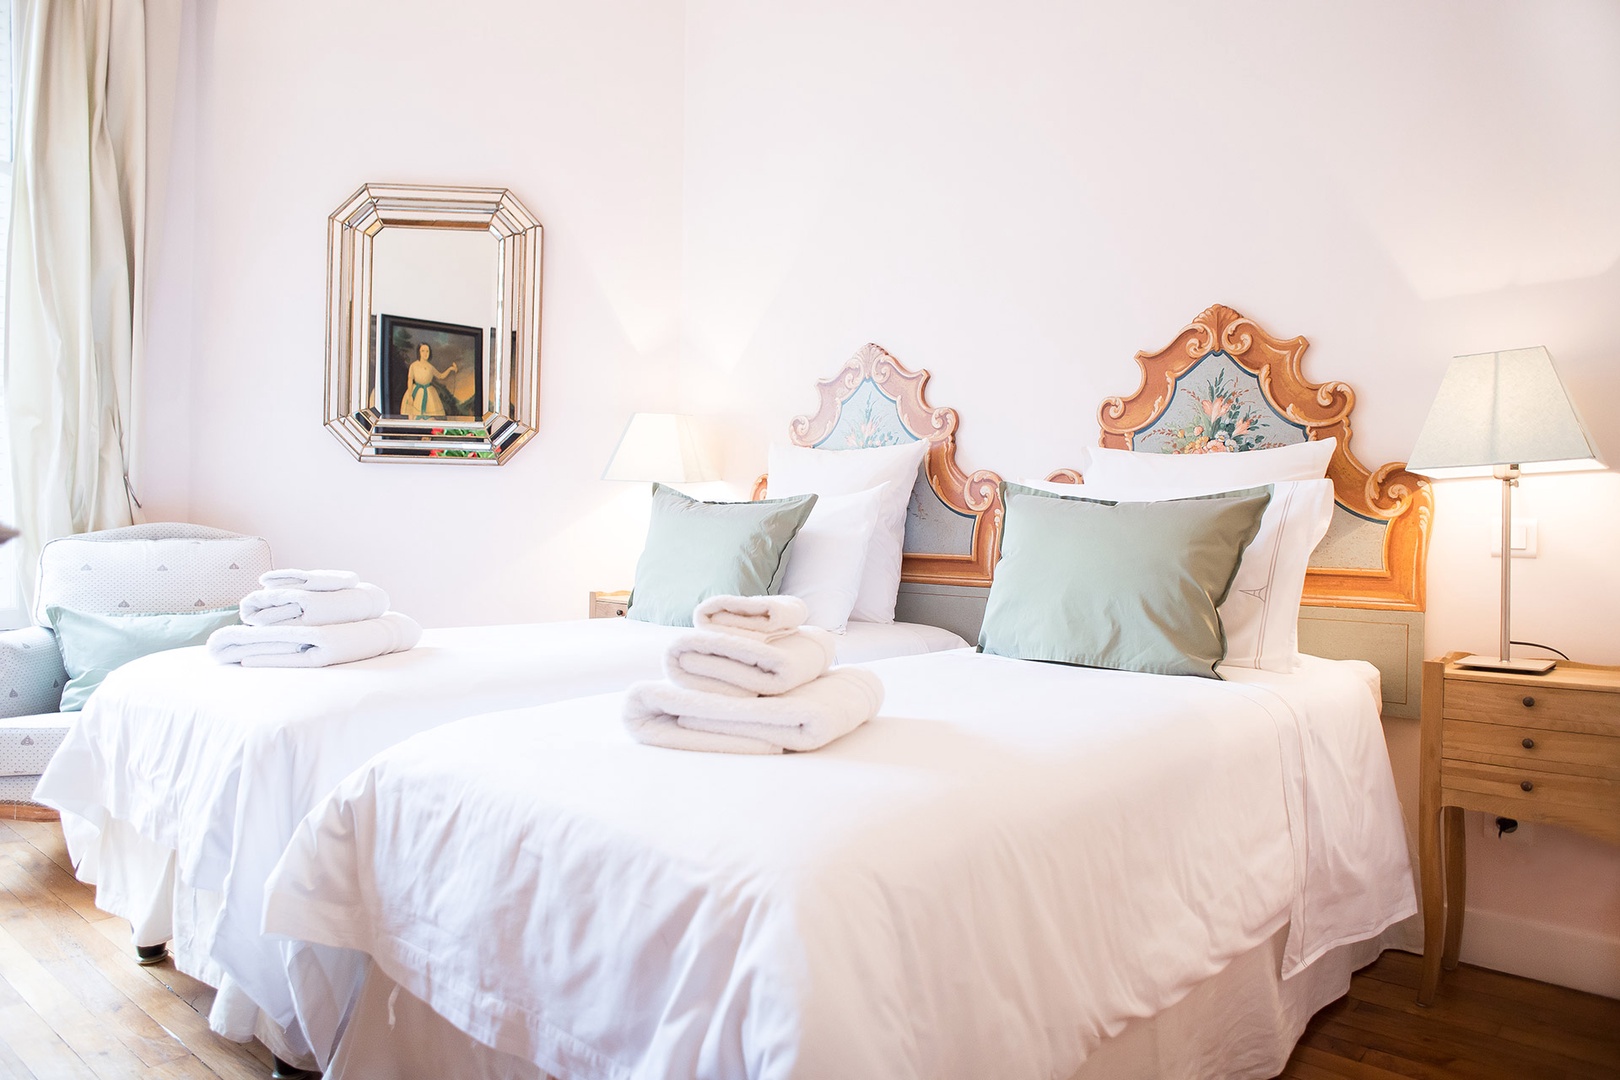 Enjoy fine furnishings and plenty of seclusion in bedroom 2.